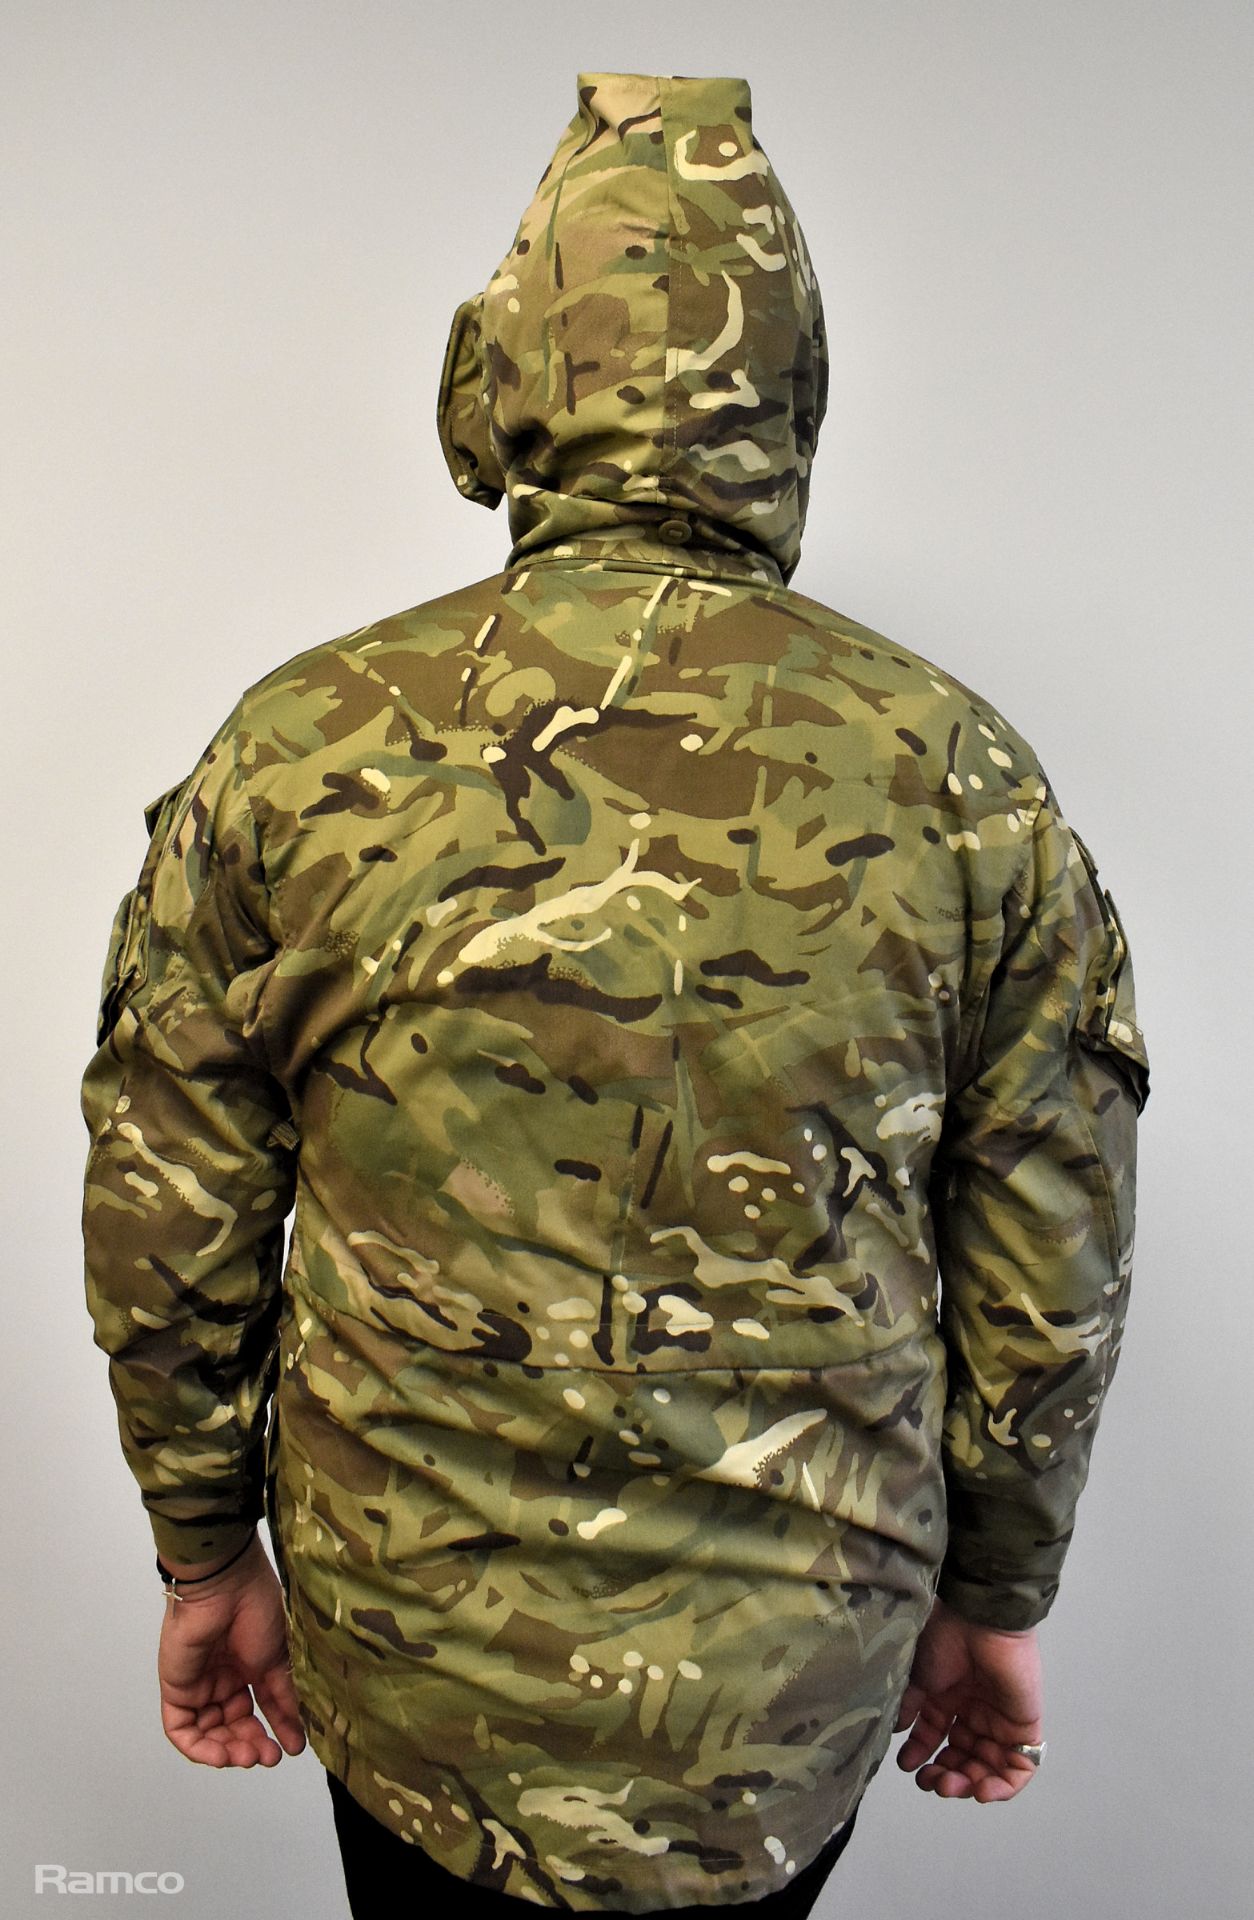 60x British Army MTP combat smocks 2 windproof - mixed grades and sizes - Image 6 of 12